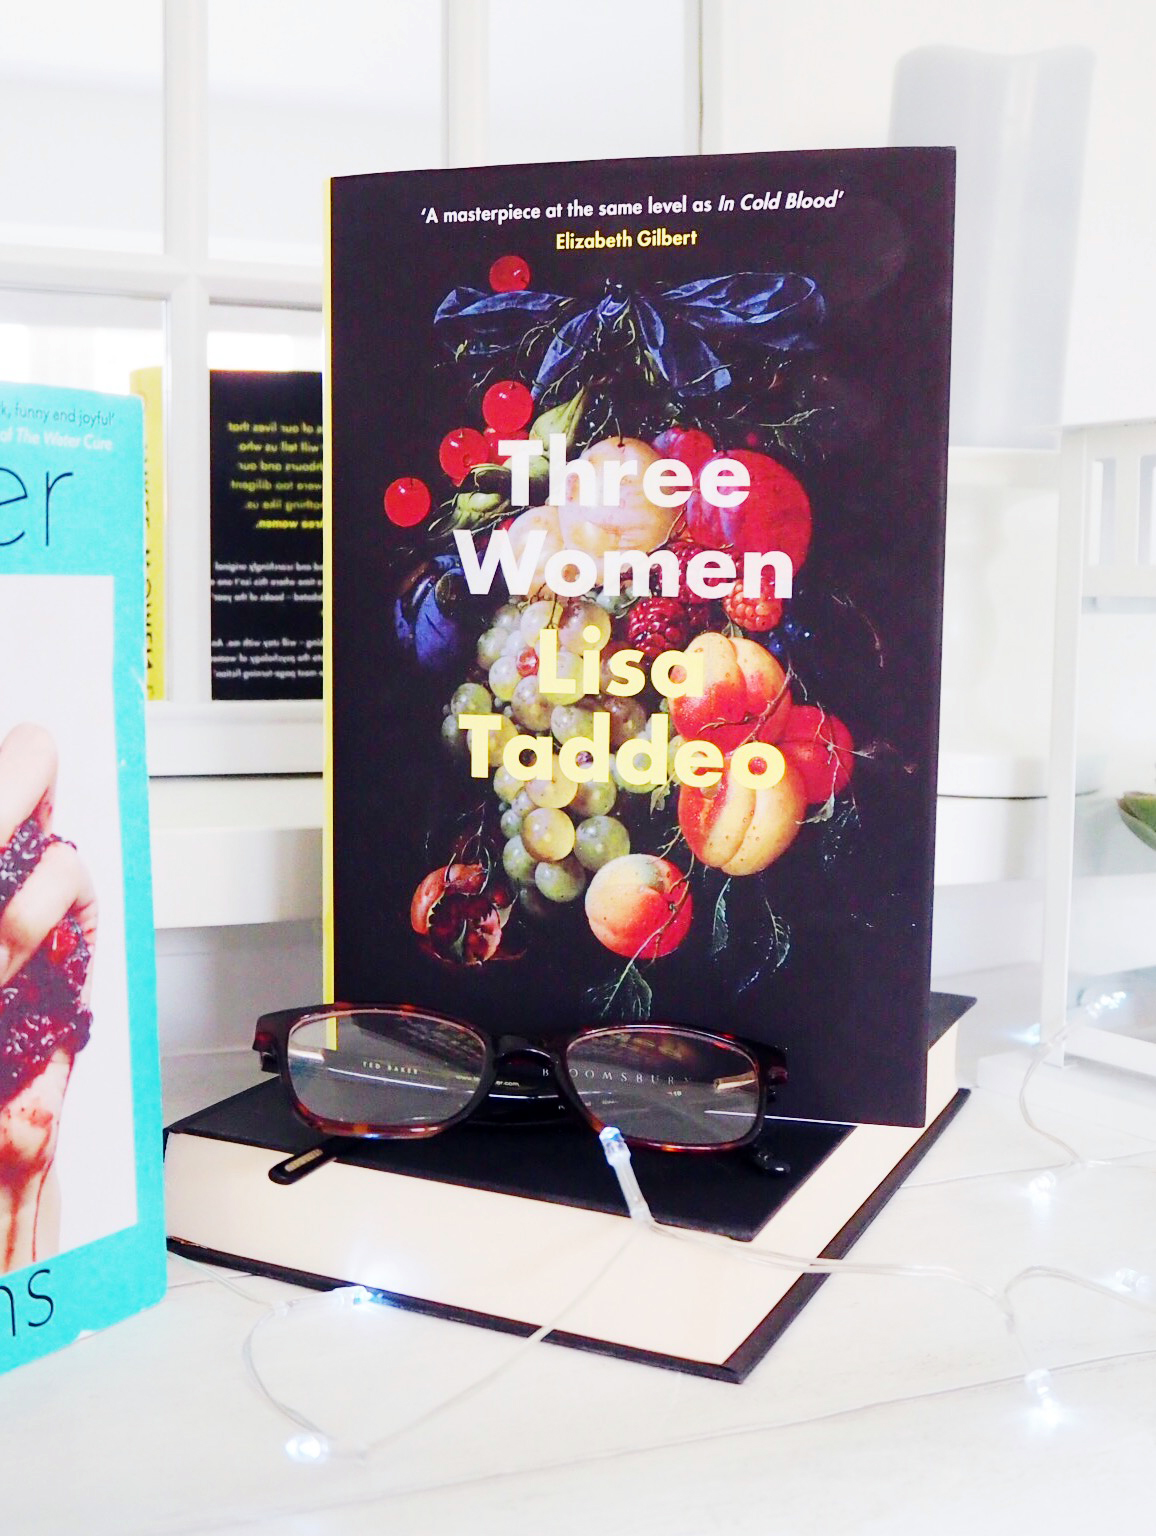 Three Women by Lisa Taddeo - Thought Provoking New Books By Women For Women